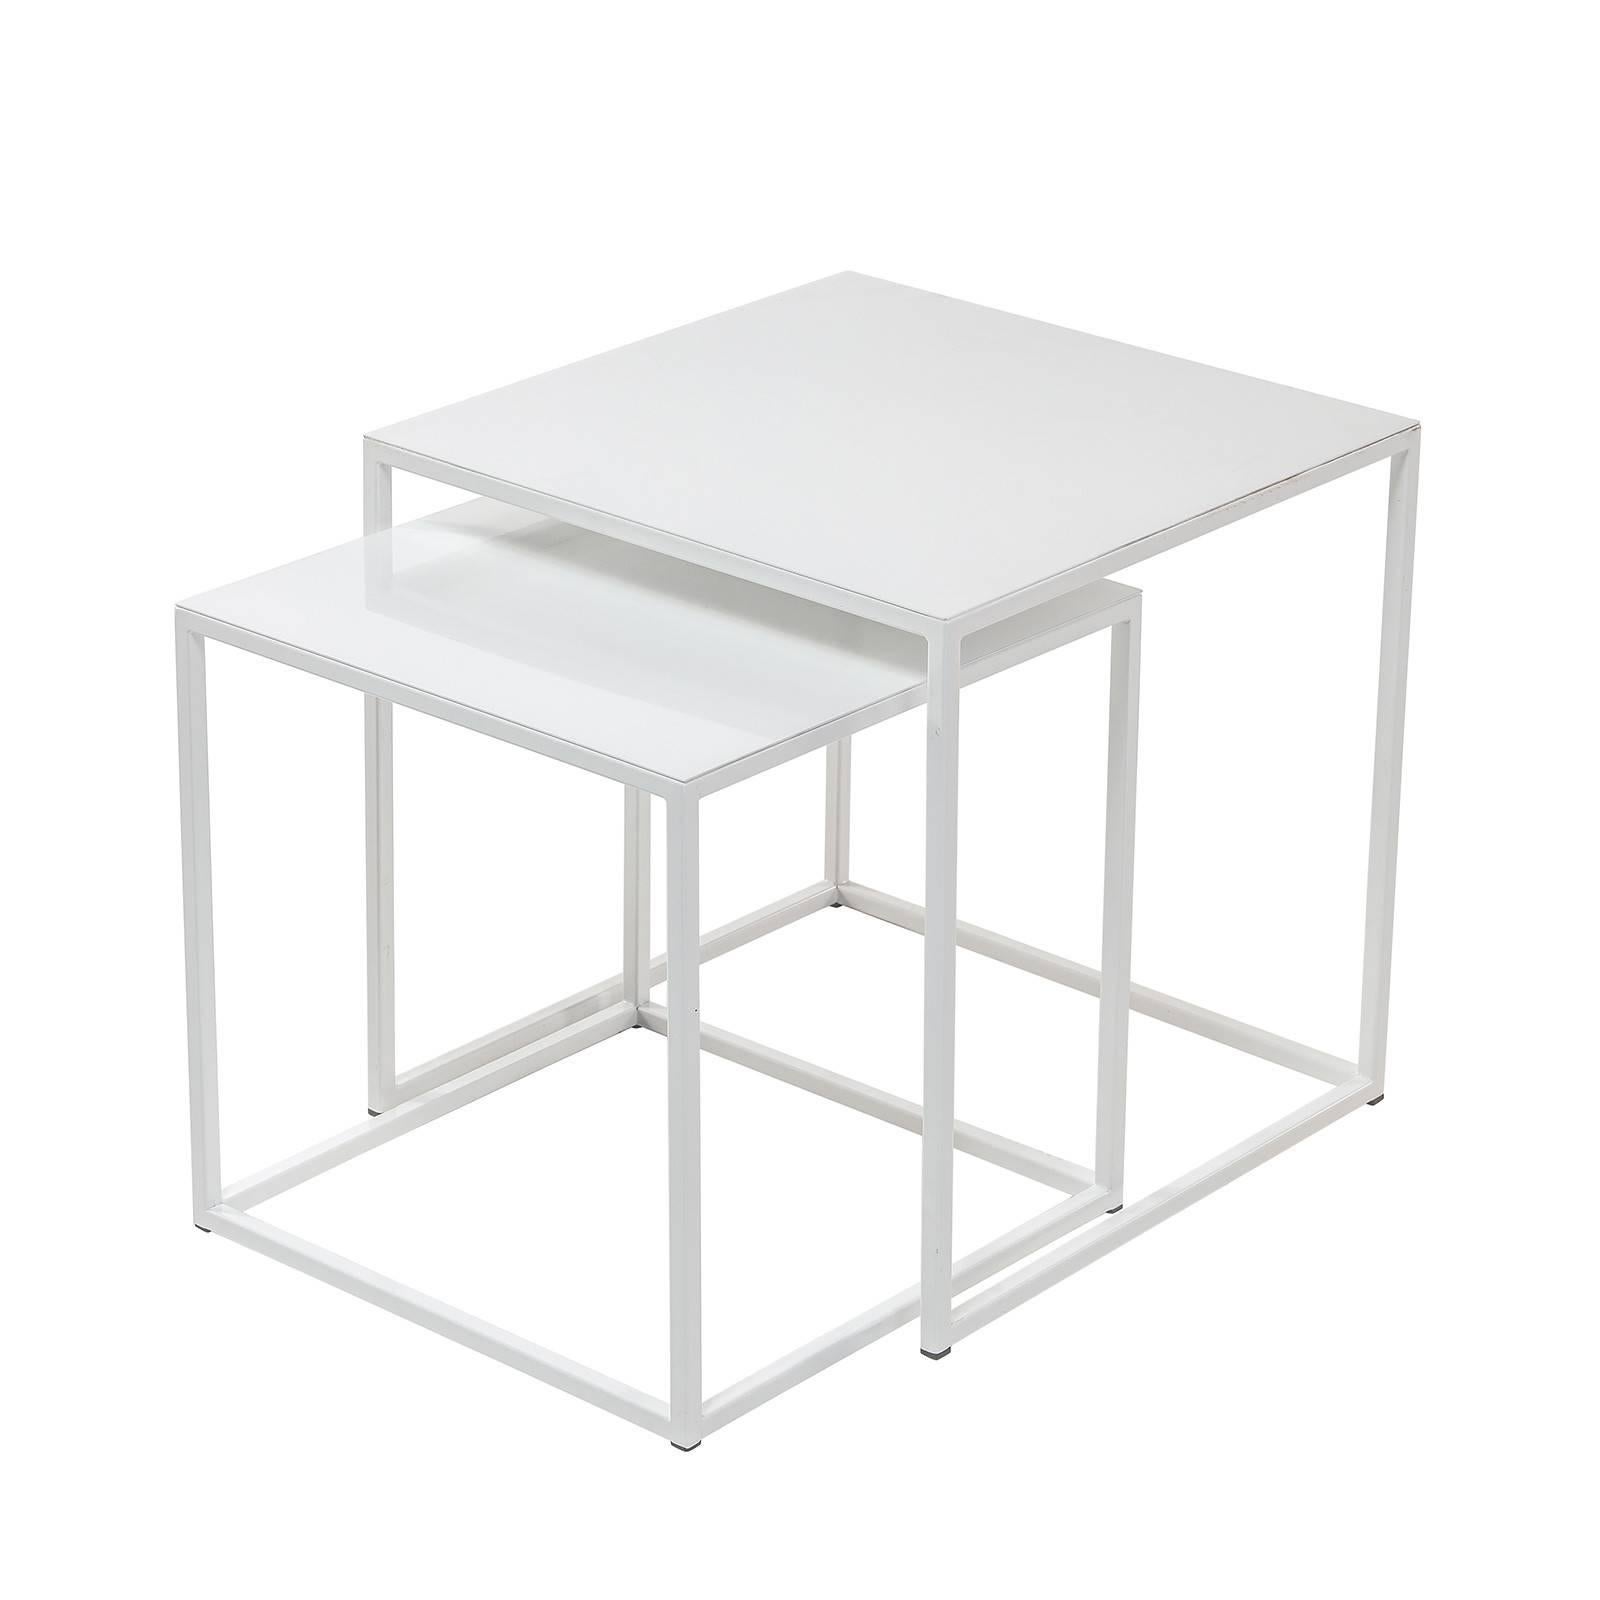 The perfect end table, stool, coffee table, side table, or anything you can think of! Combine this pair of powder coated white metal cubes to create something unique.

Measures: Small table 15